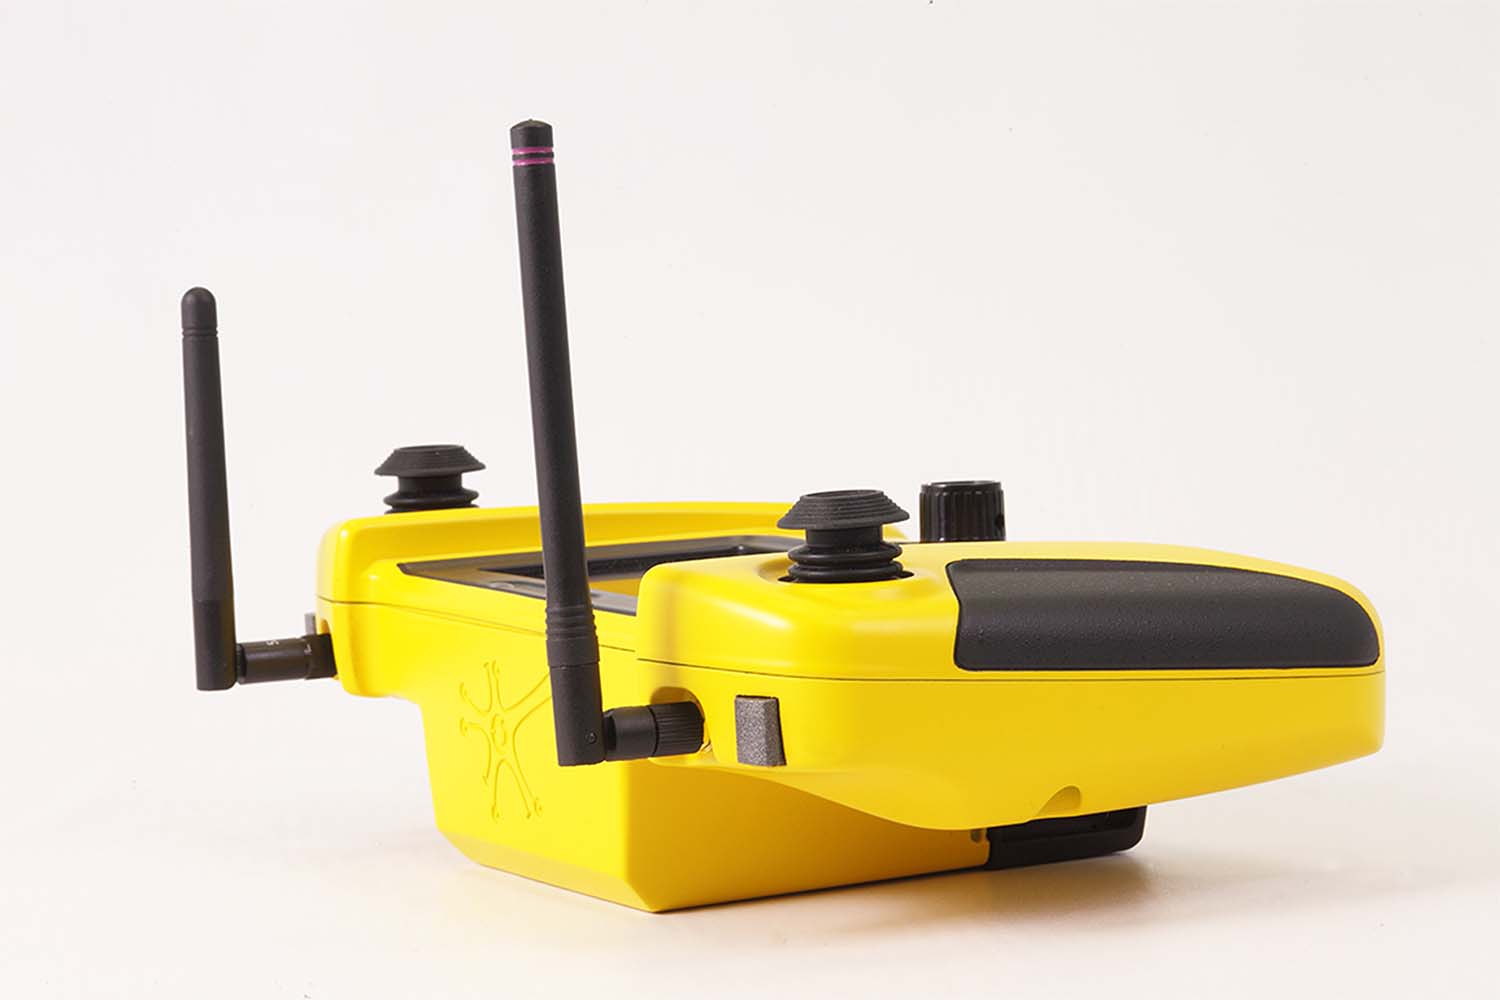 CNC machined yellow robot controller device